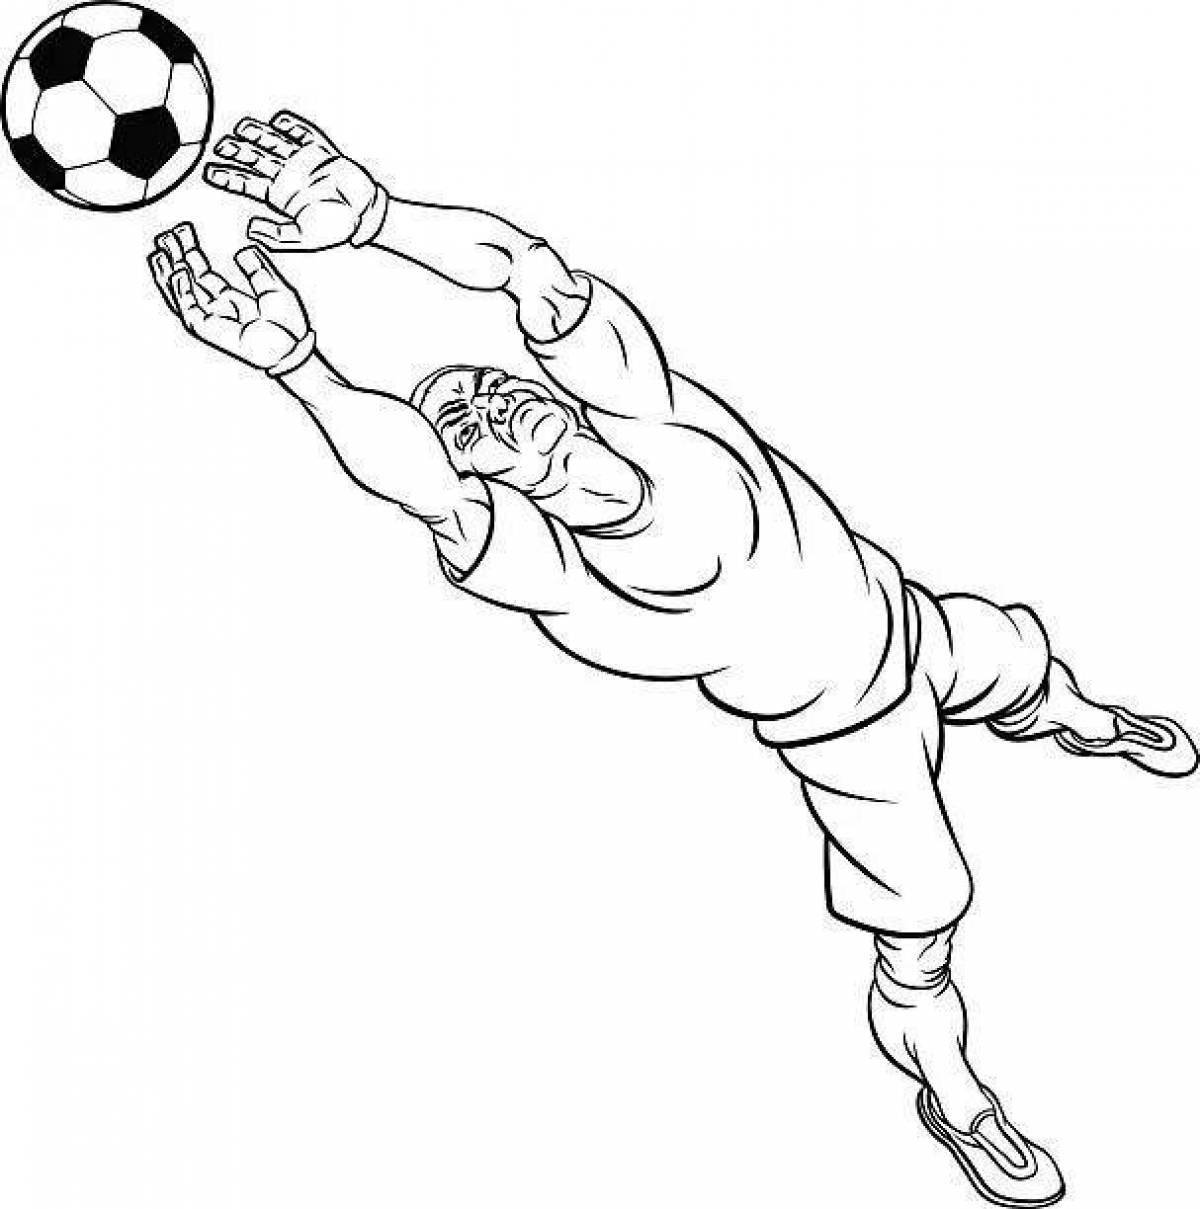 Football goalkeeper coloring page